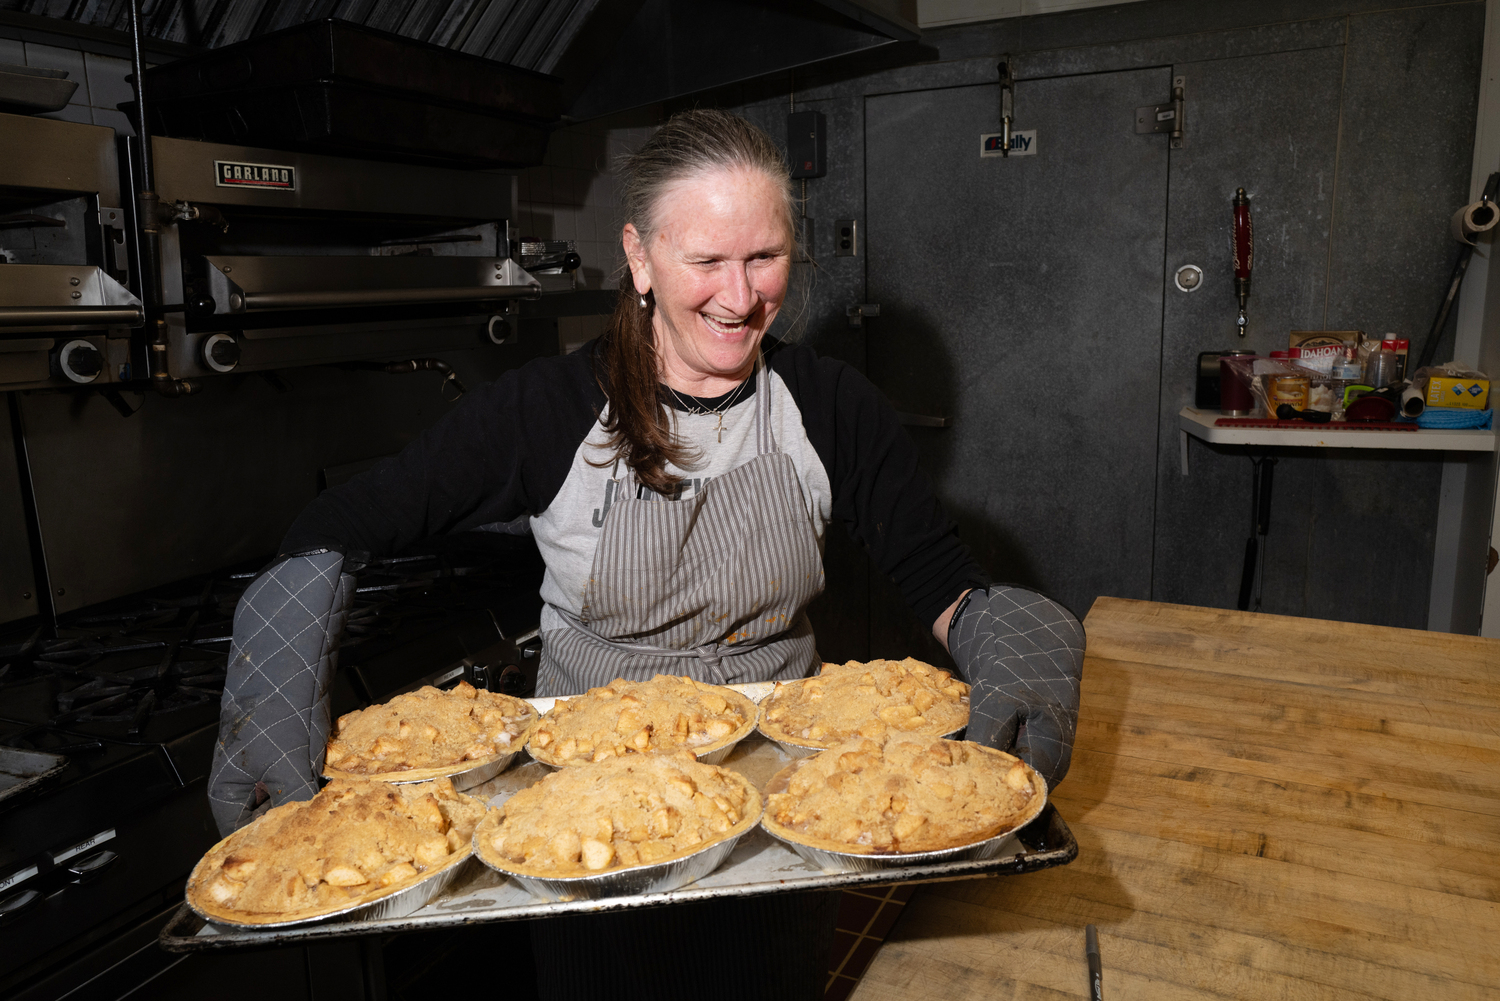 Rhodi Winchell with a load of freshly baked pies. LORI HAWKINS